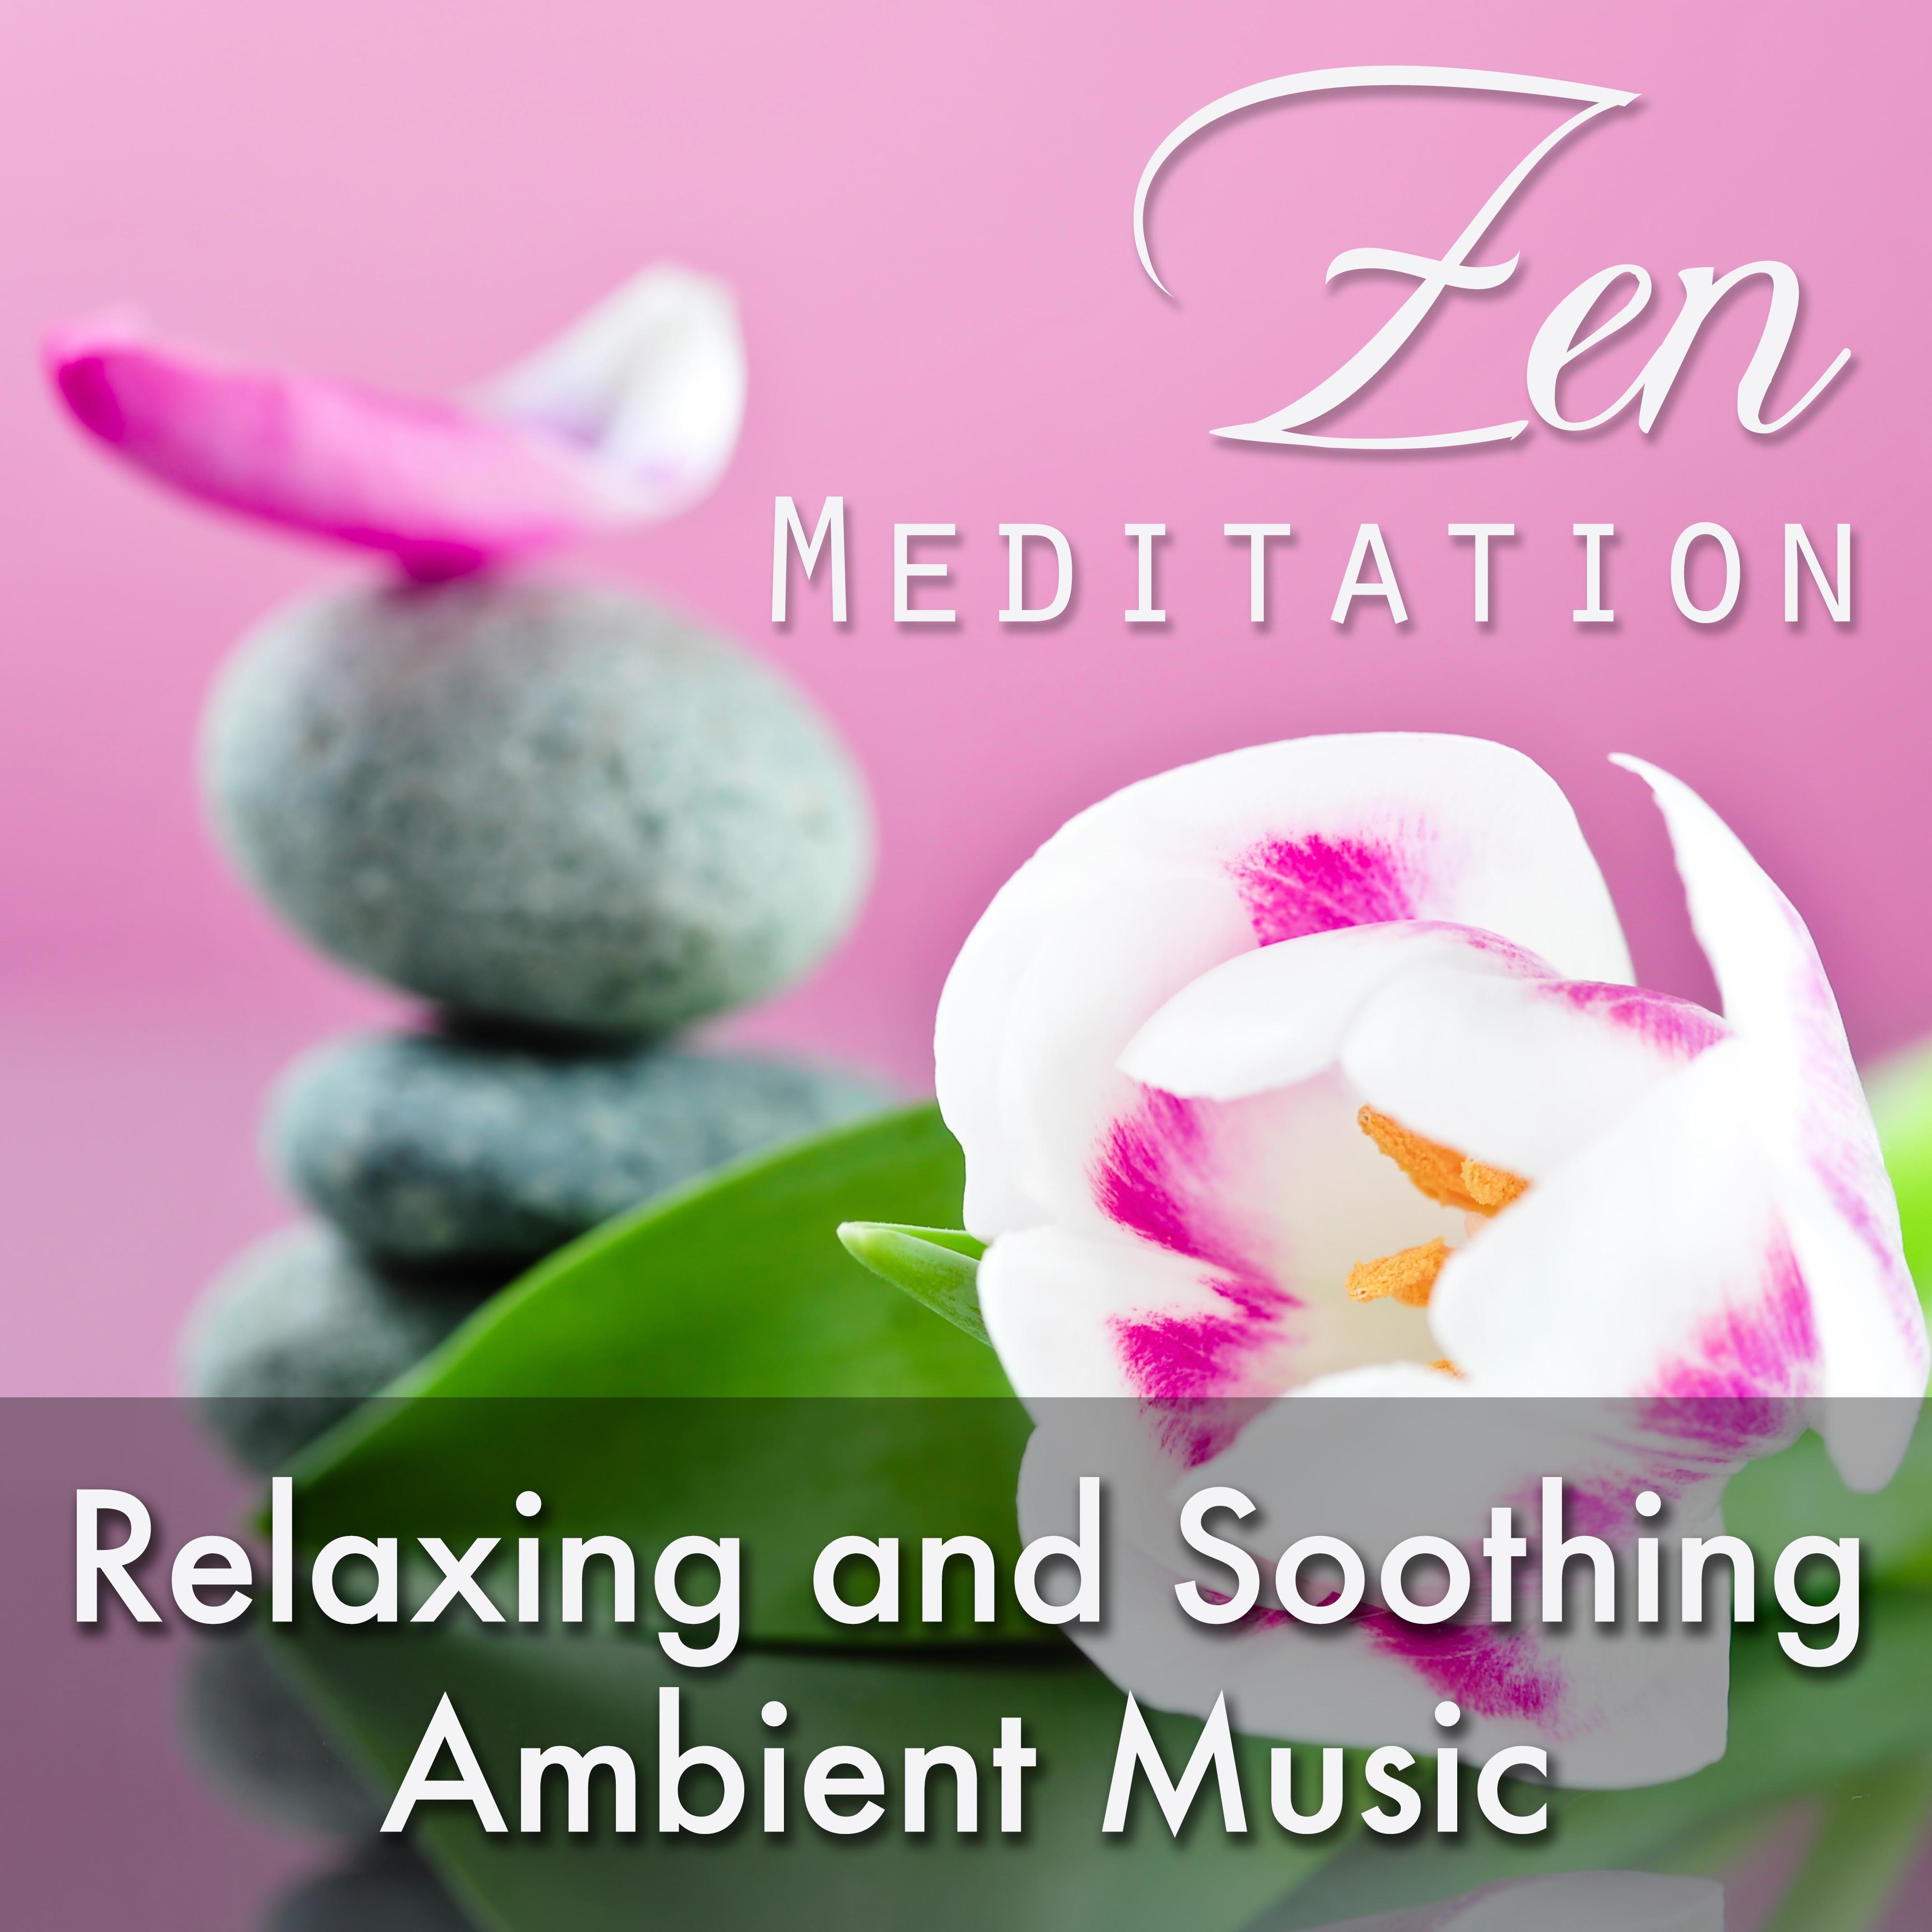 Zen Meditation - Relaxing and Soothing Ambient Music for Deep Relaxation with Nature Sounds like Rain, Ocean Waves and Thunderstorms